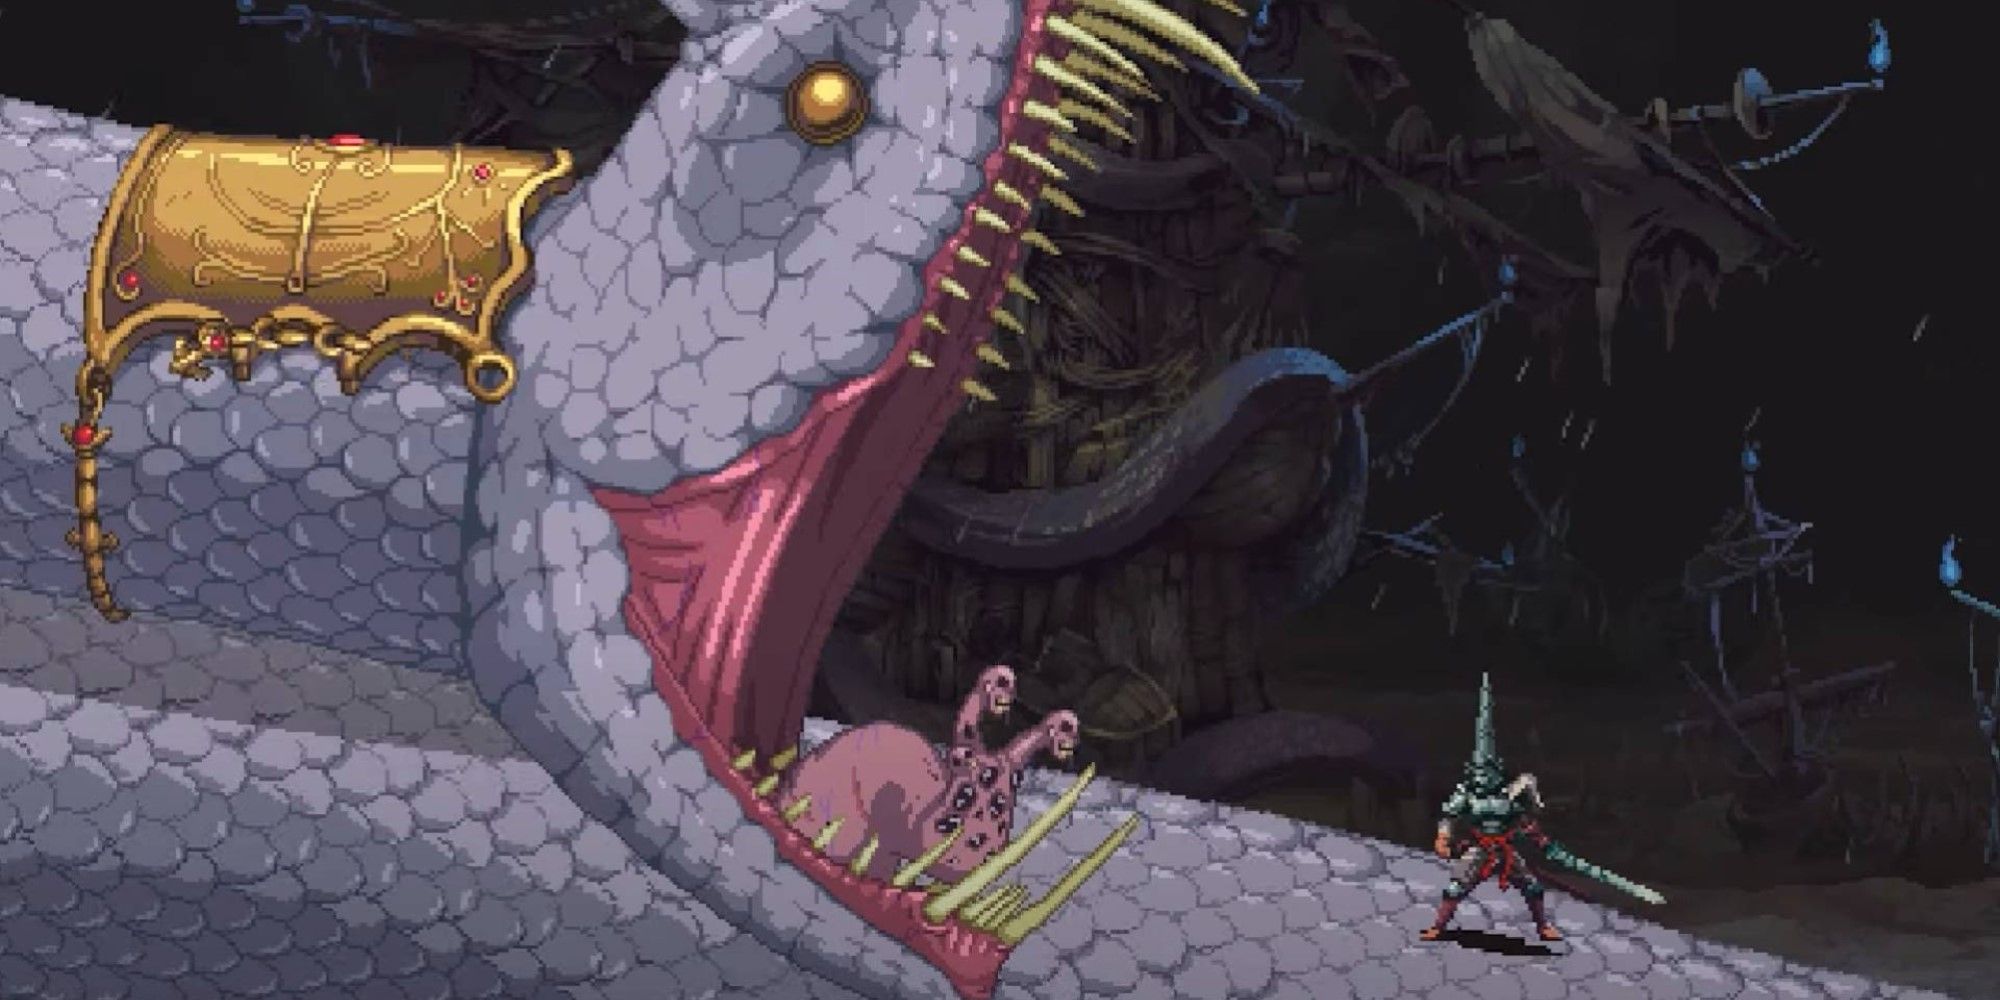 The protagonist about to be eaten by a huge snake.